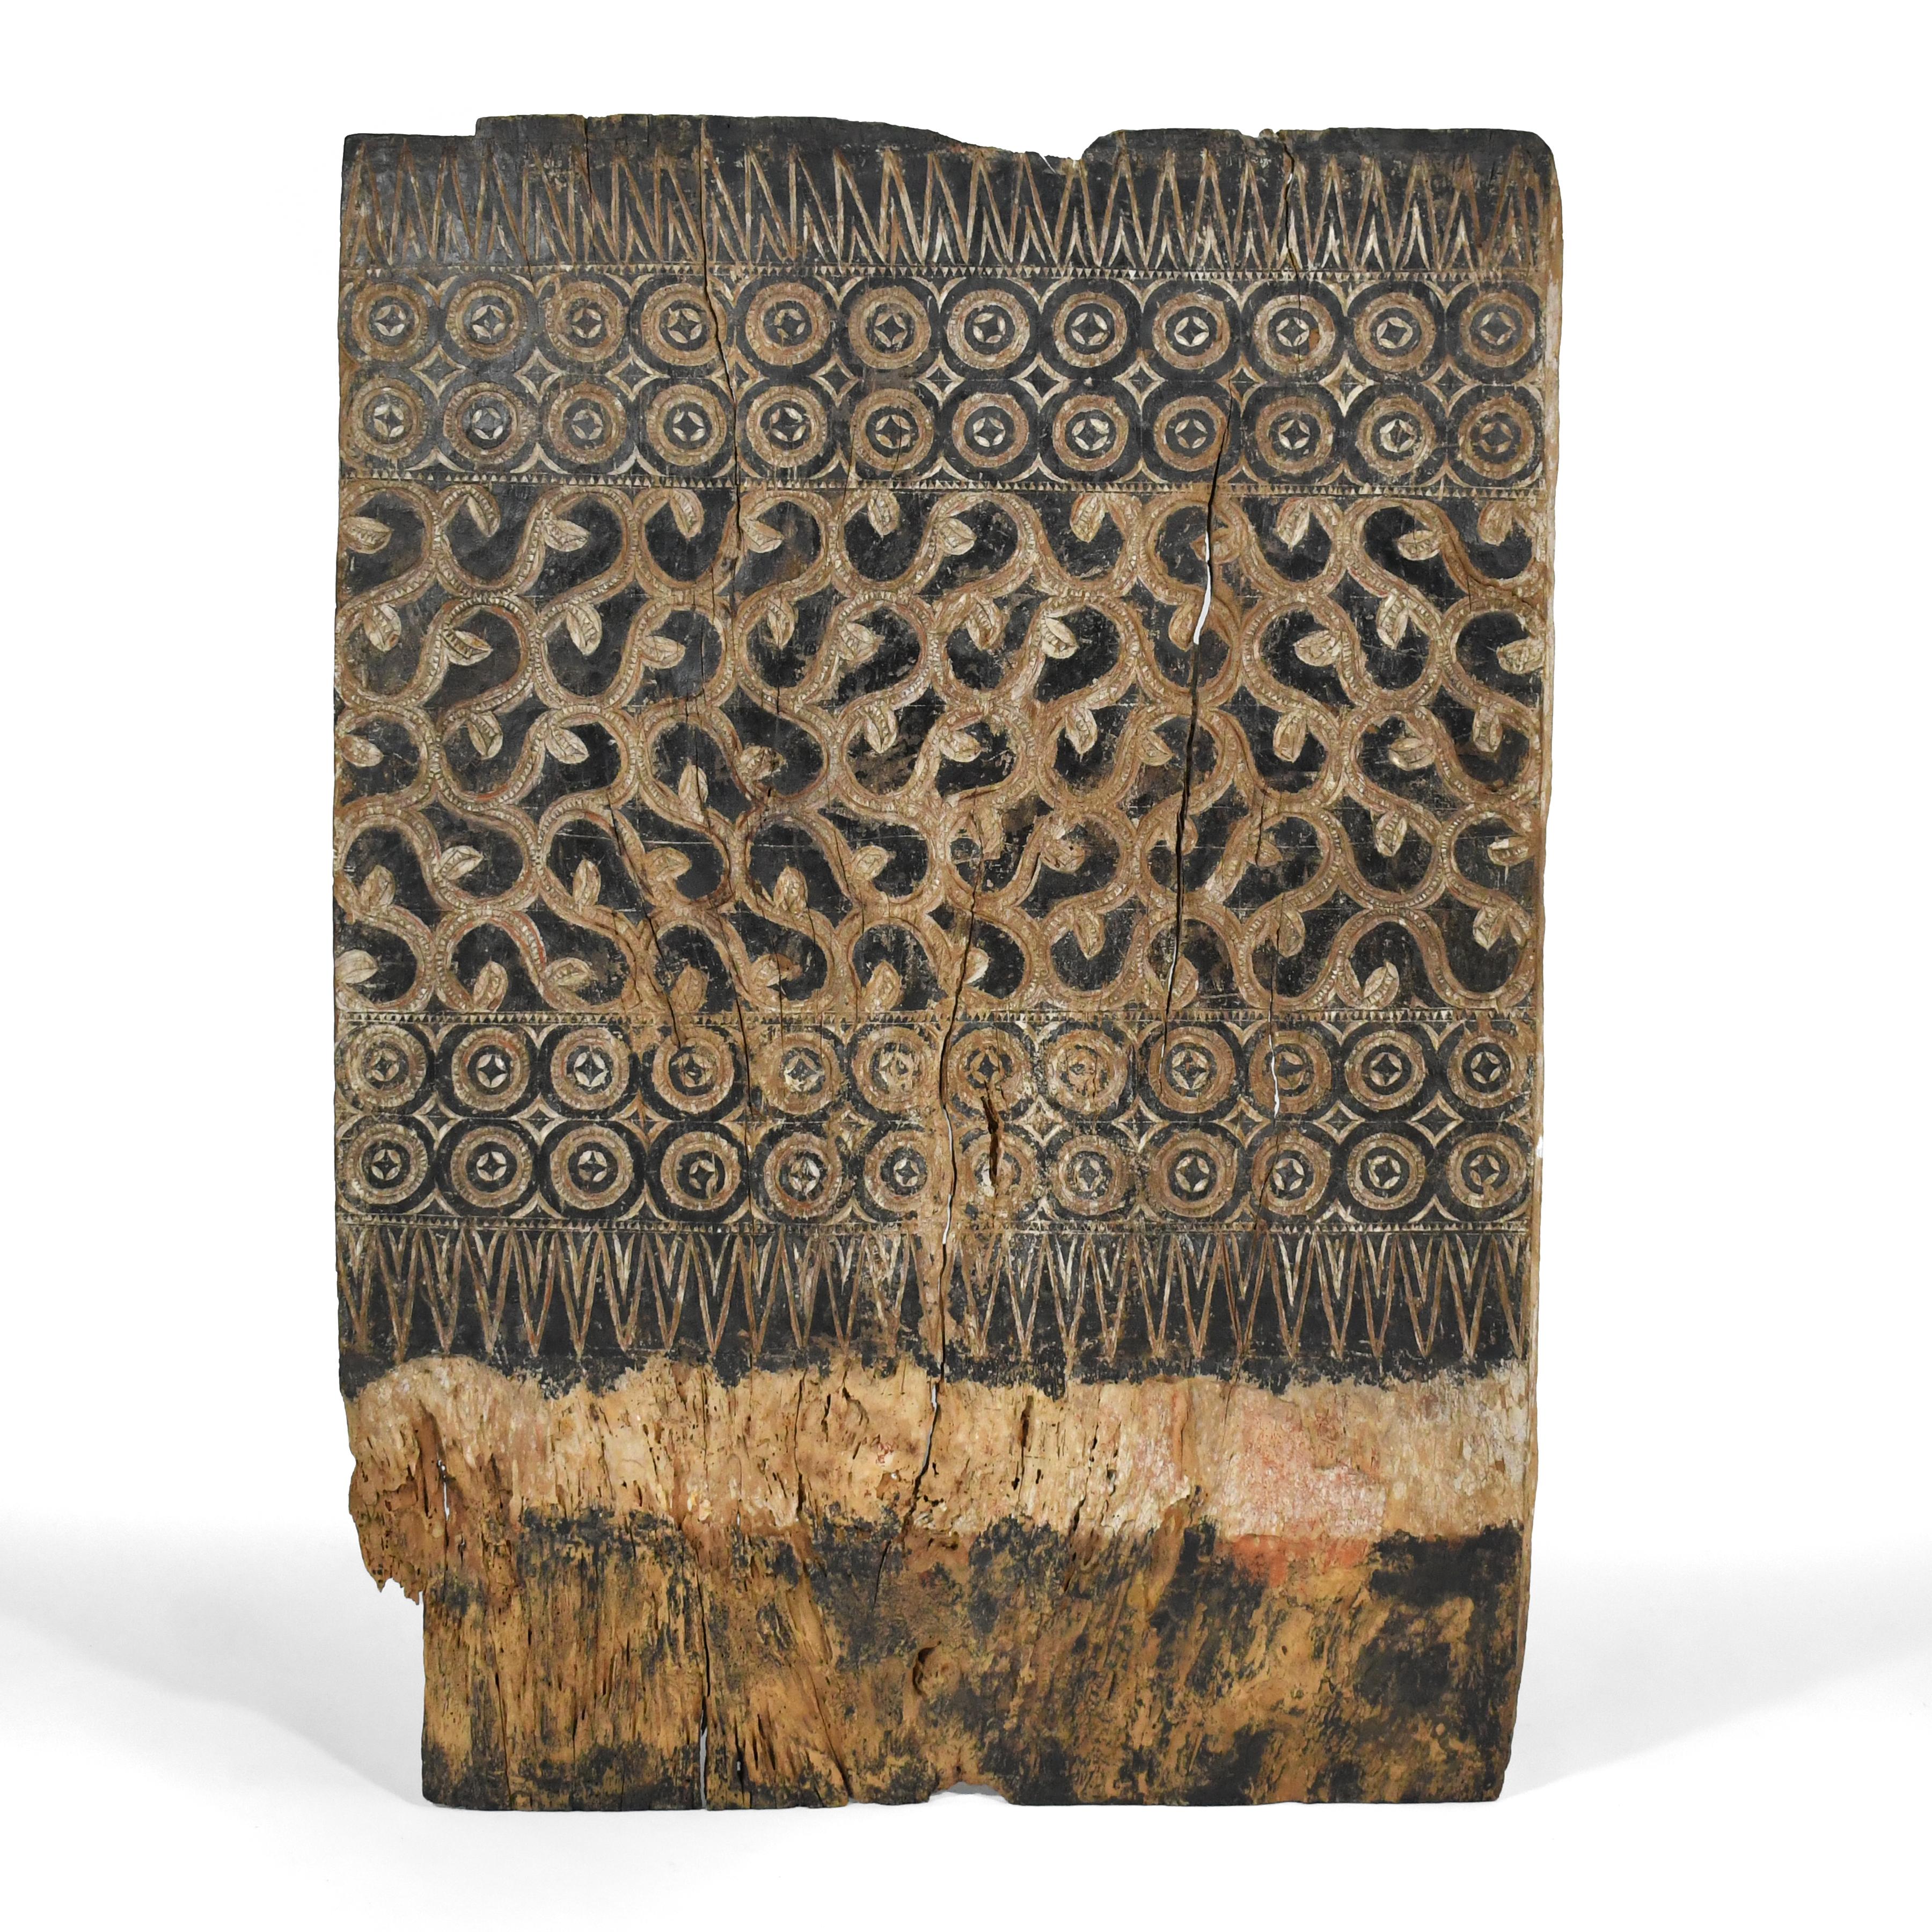 This powerful piece was originally a door, but removed from its context, it becomes a dynamic abstract artwork. Bands of repeating patterns and a heavily distressed patina from age and use activate the surface and create great visual